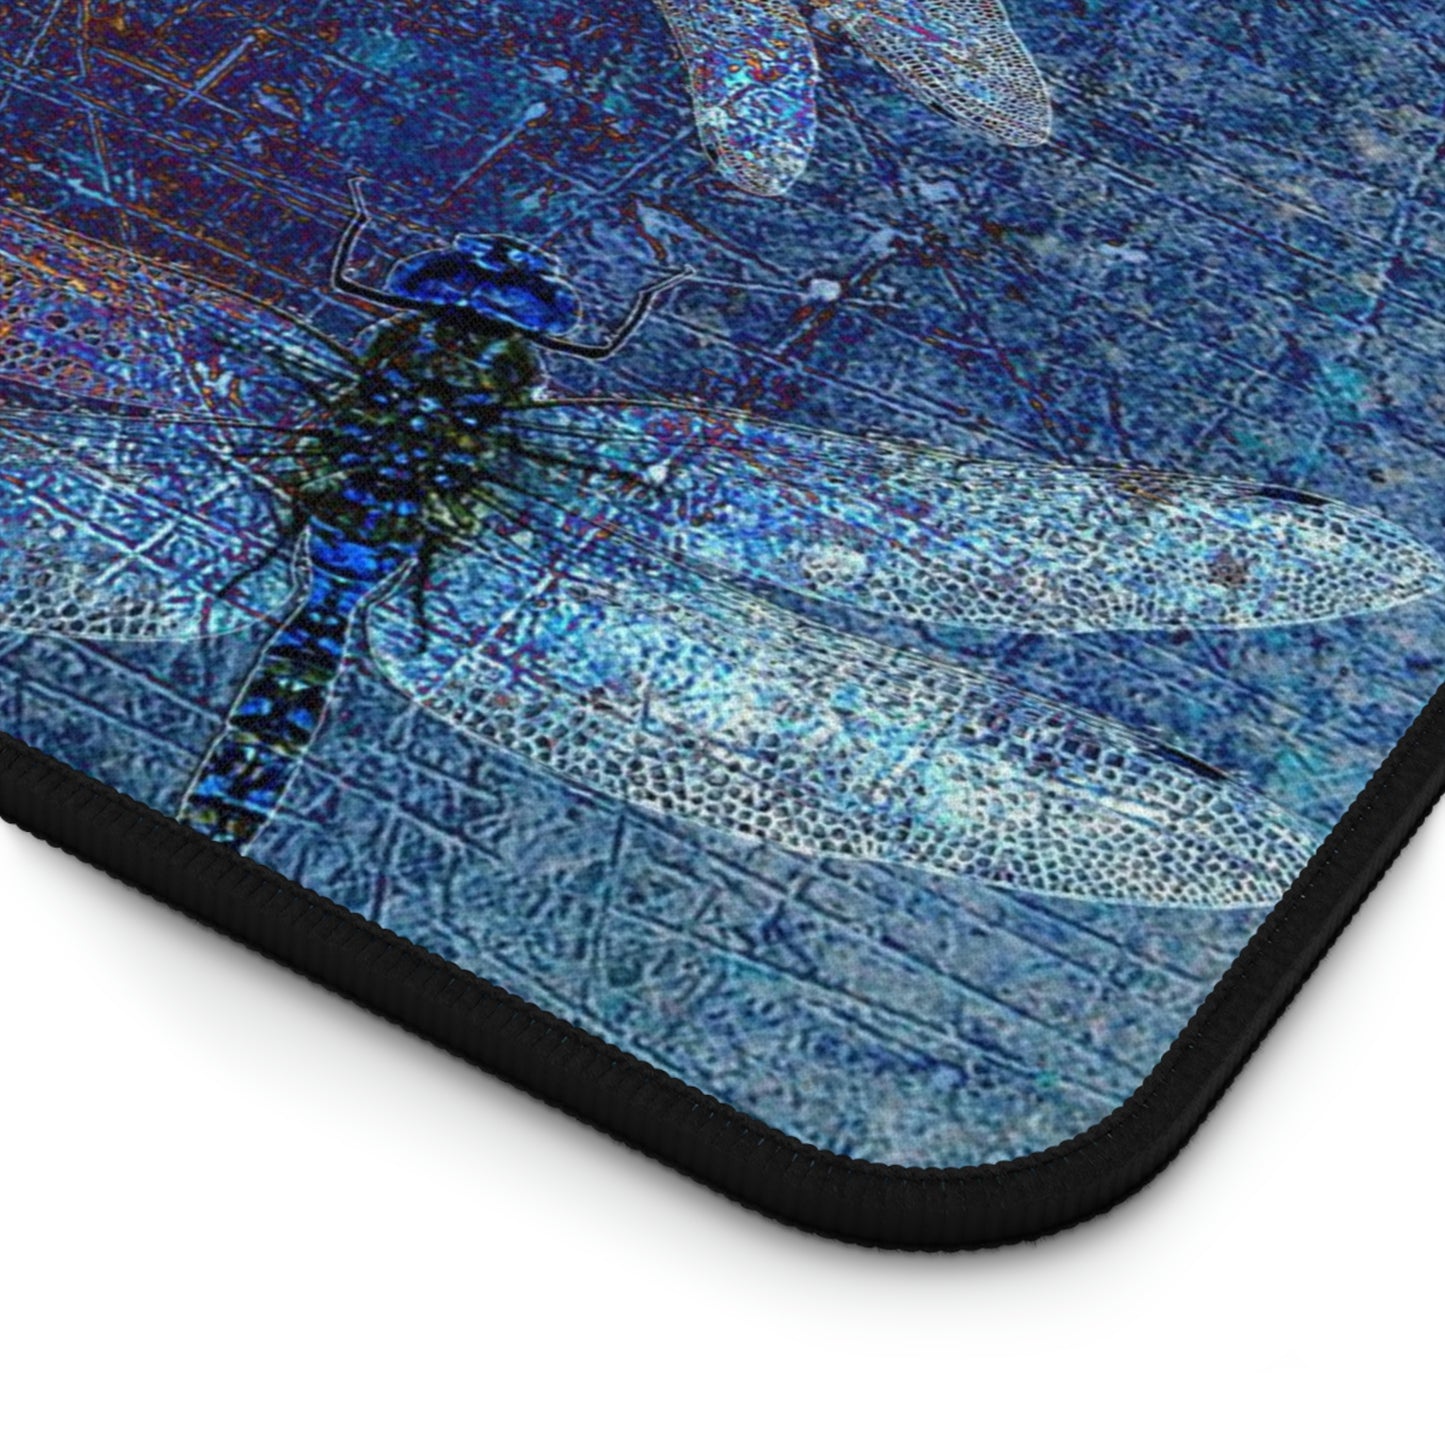 Dragonfly Desk Accessories - Flight of Dragonflies on Distressed Blue Background close up